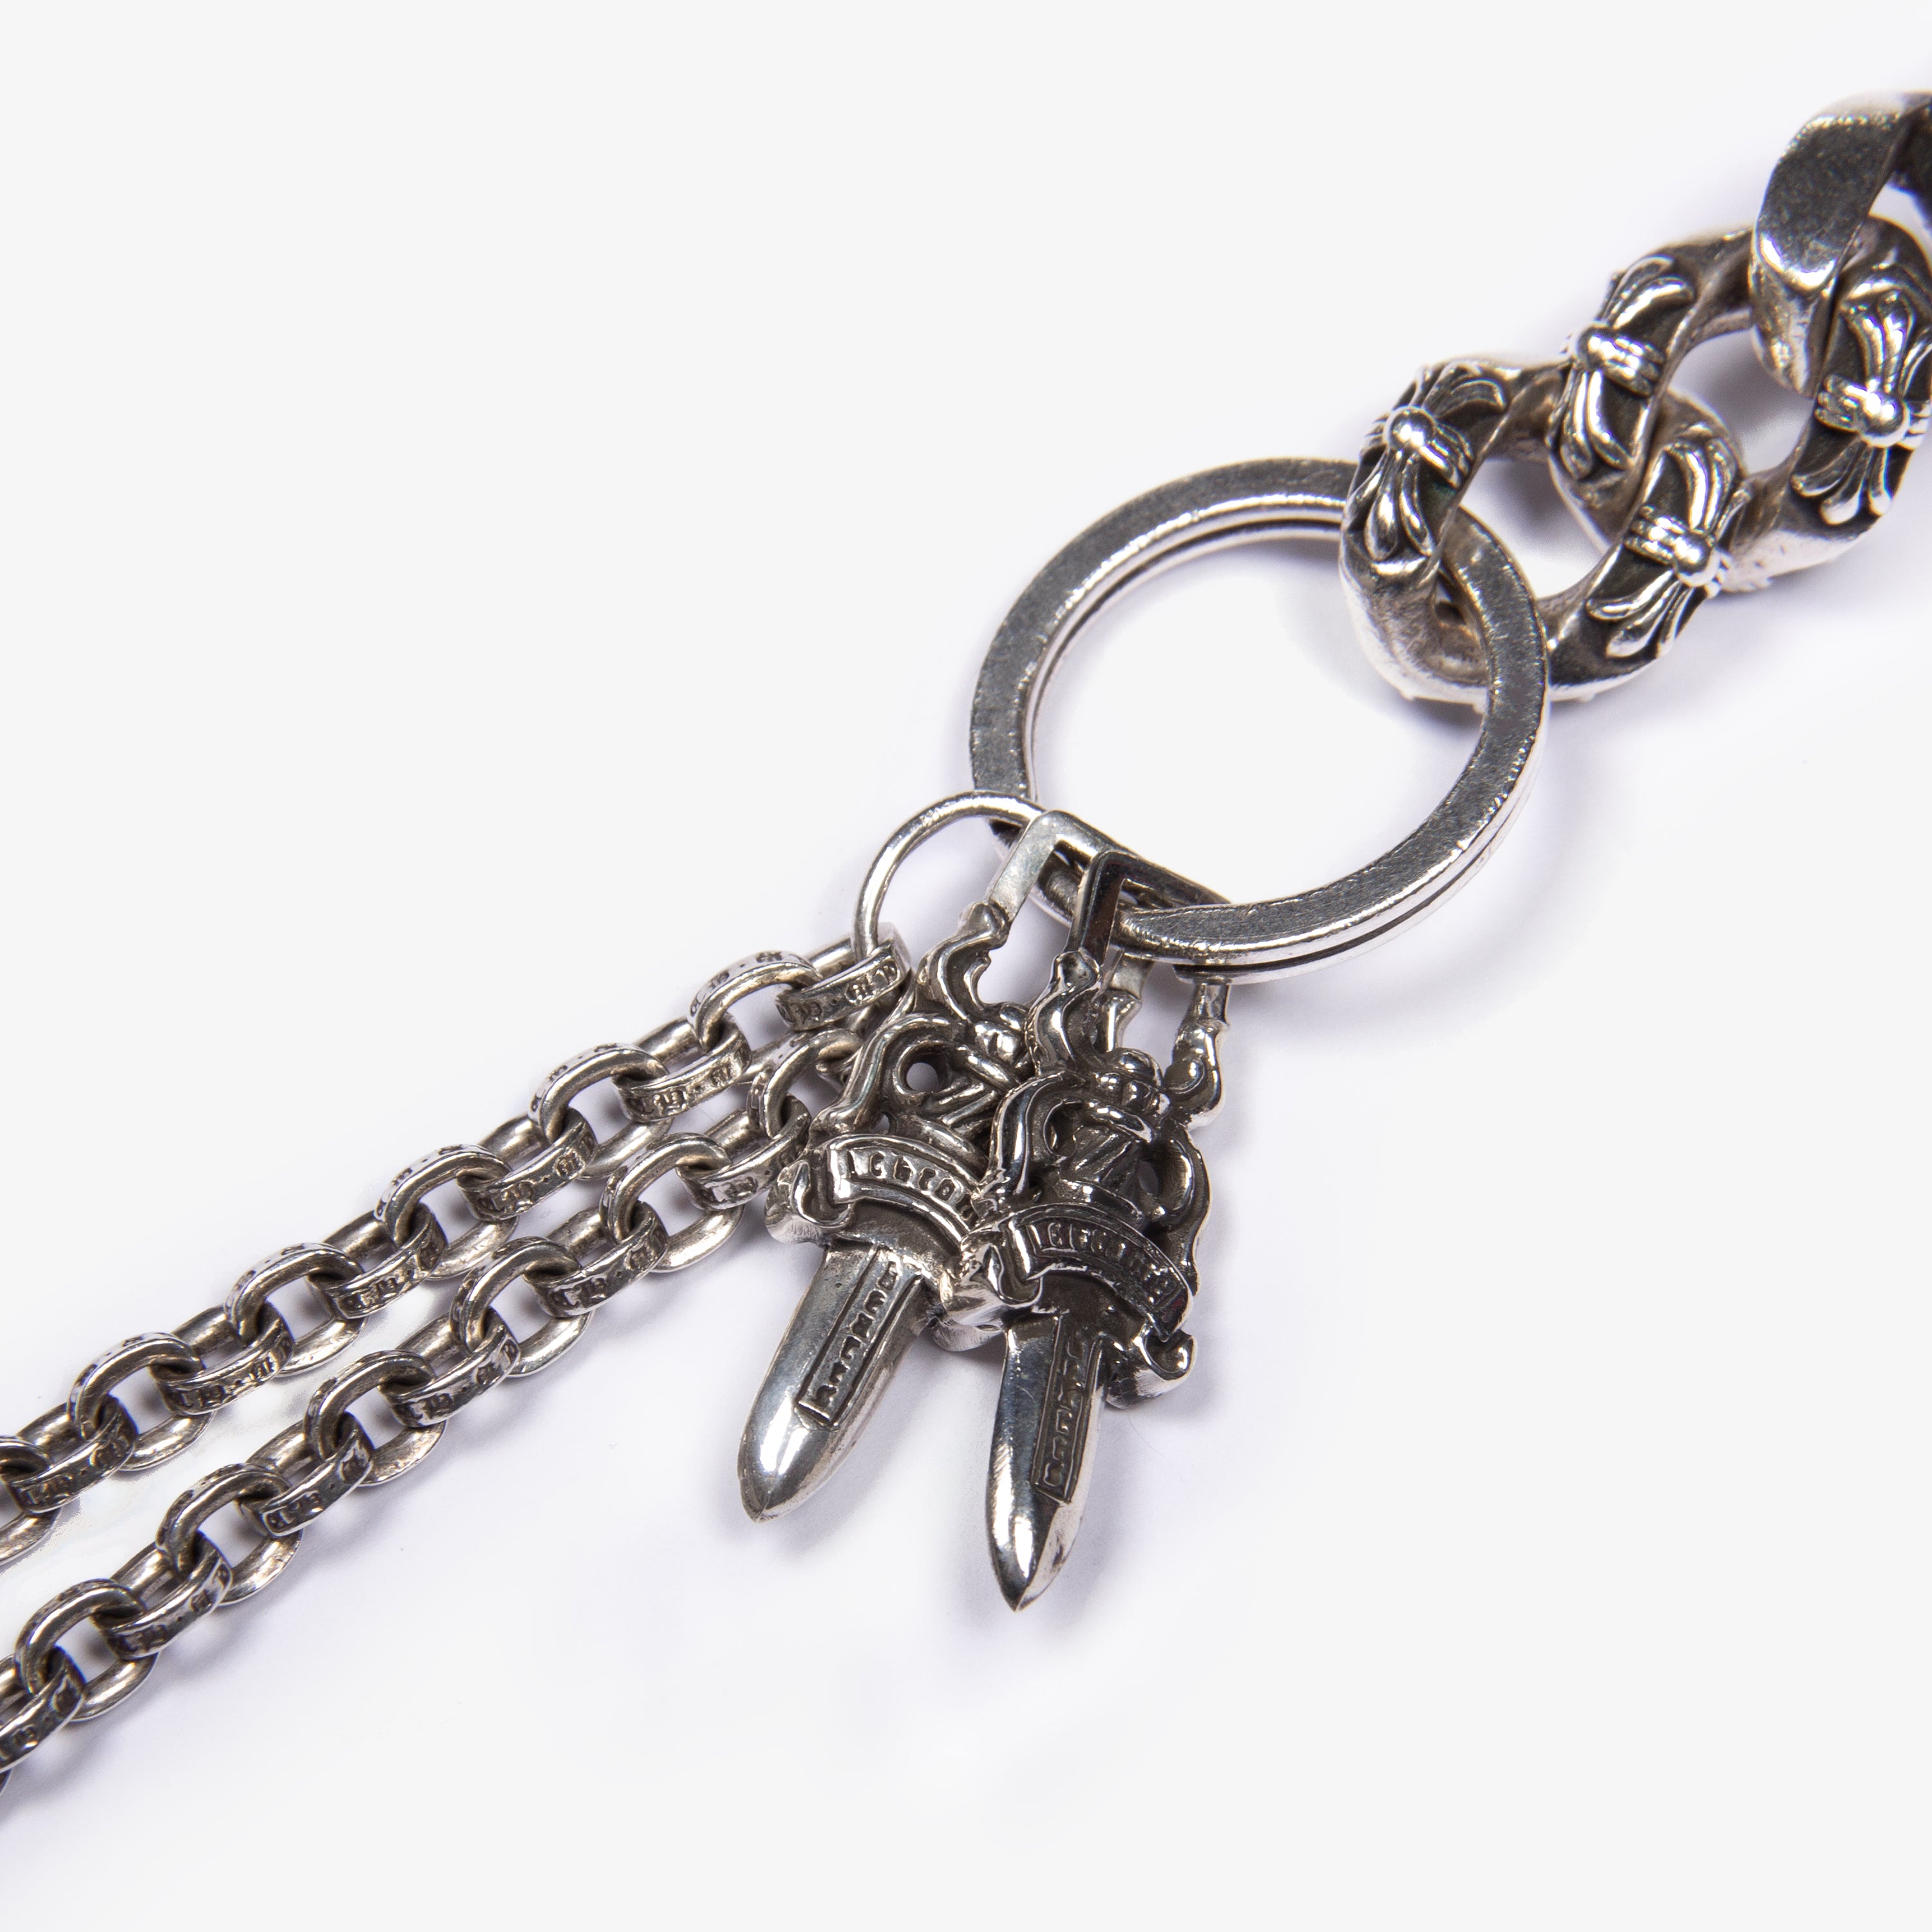 EXTRA FANCY KEYCHAIN WITH CHARMS